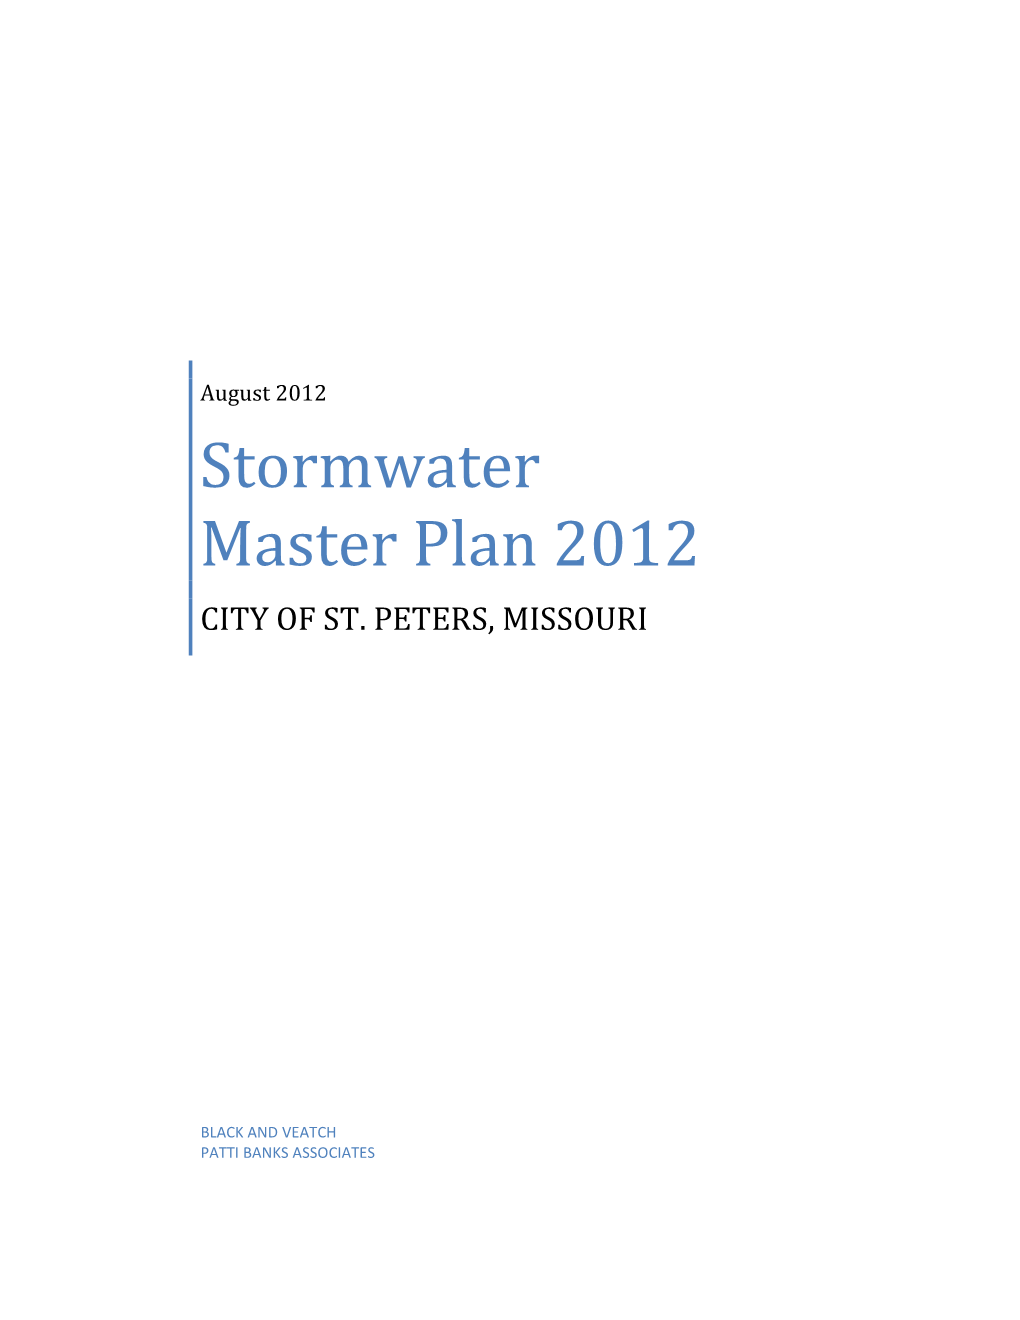 Stormwater Master Plan 2012 CITY of ST